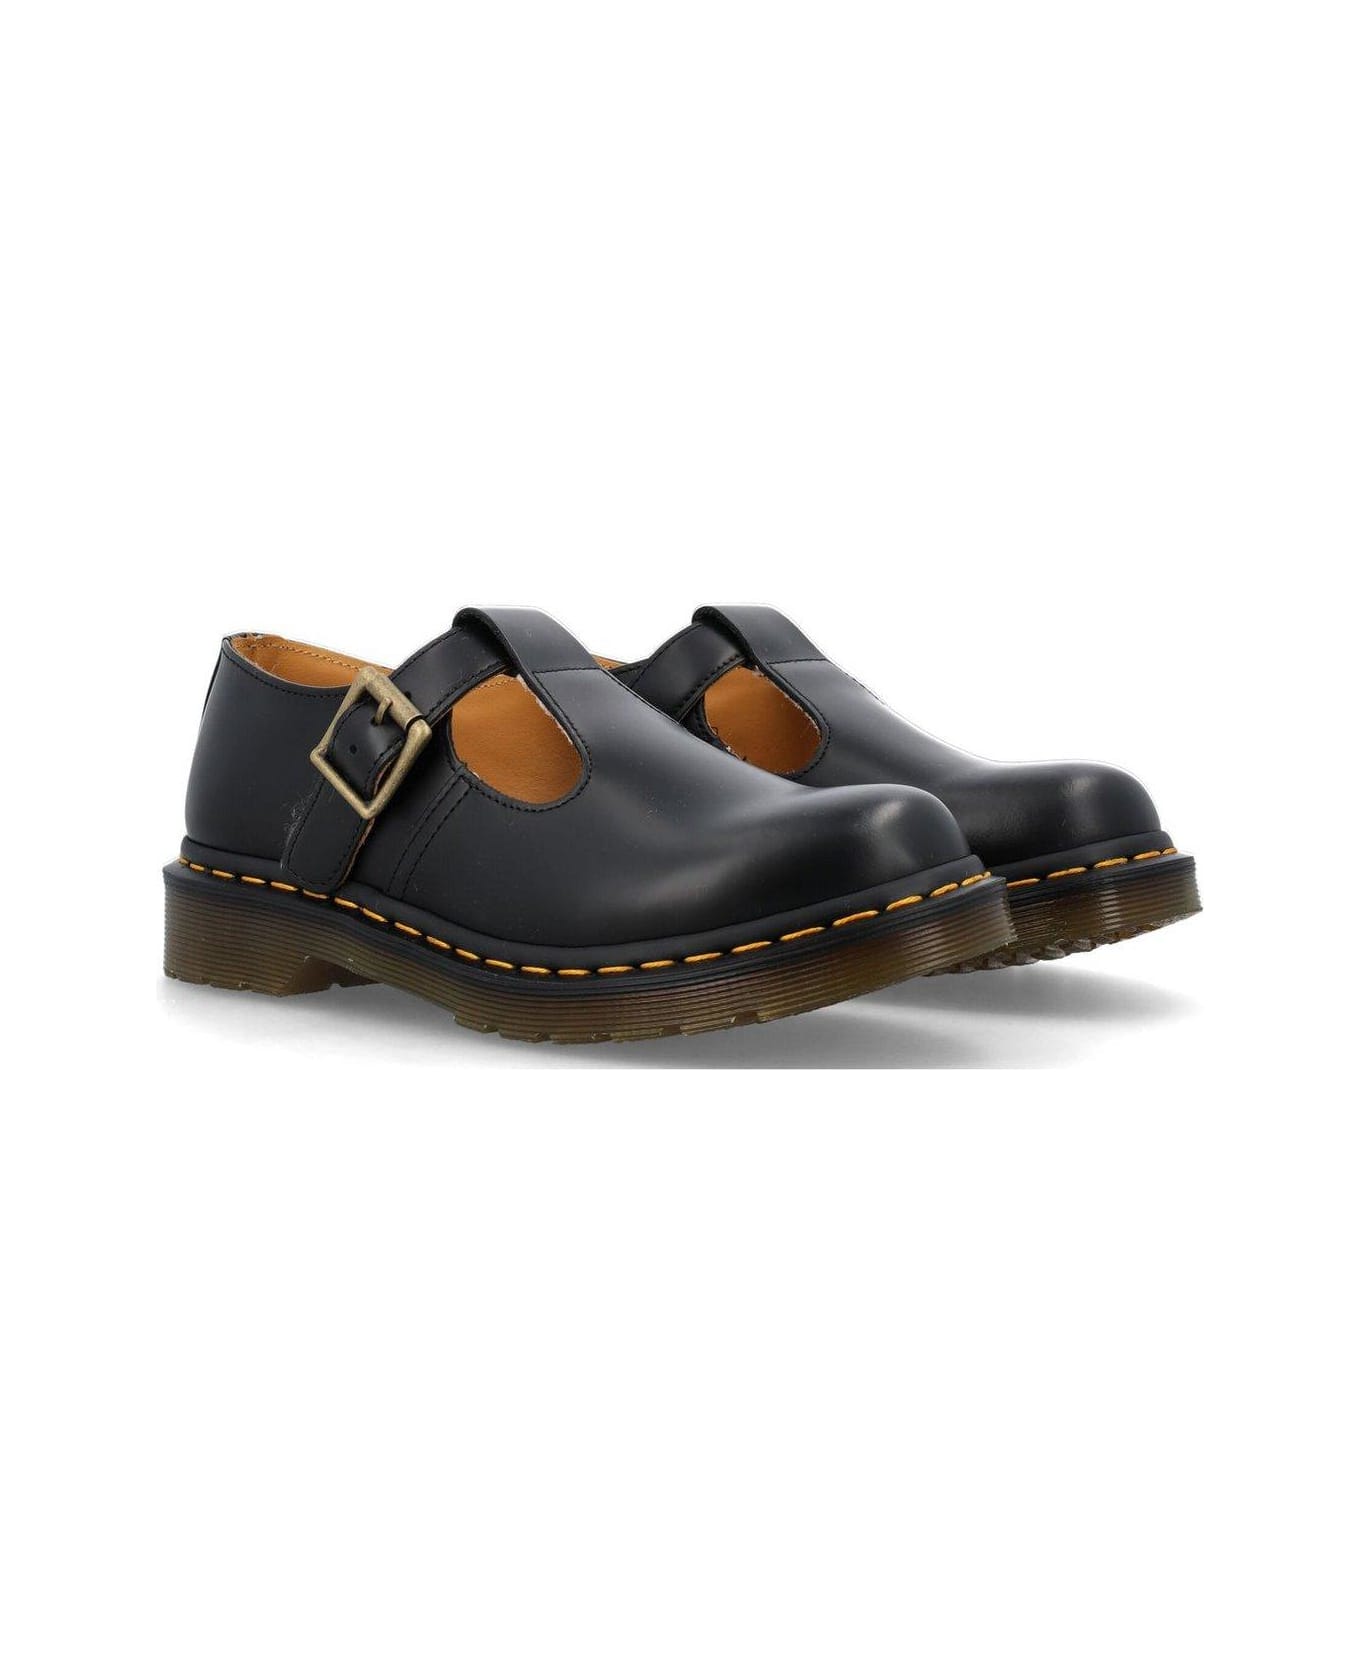 Dr. Martens Polley Mary Jane Flat Shoes - BLACK フラットシューズ